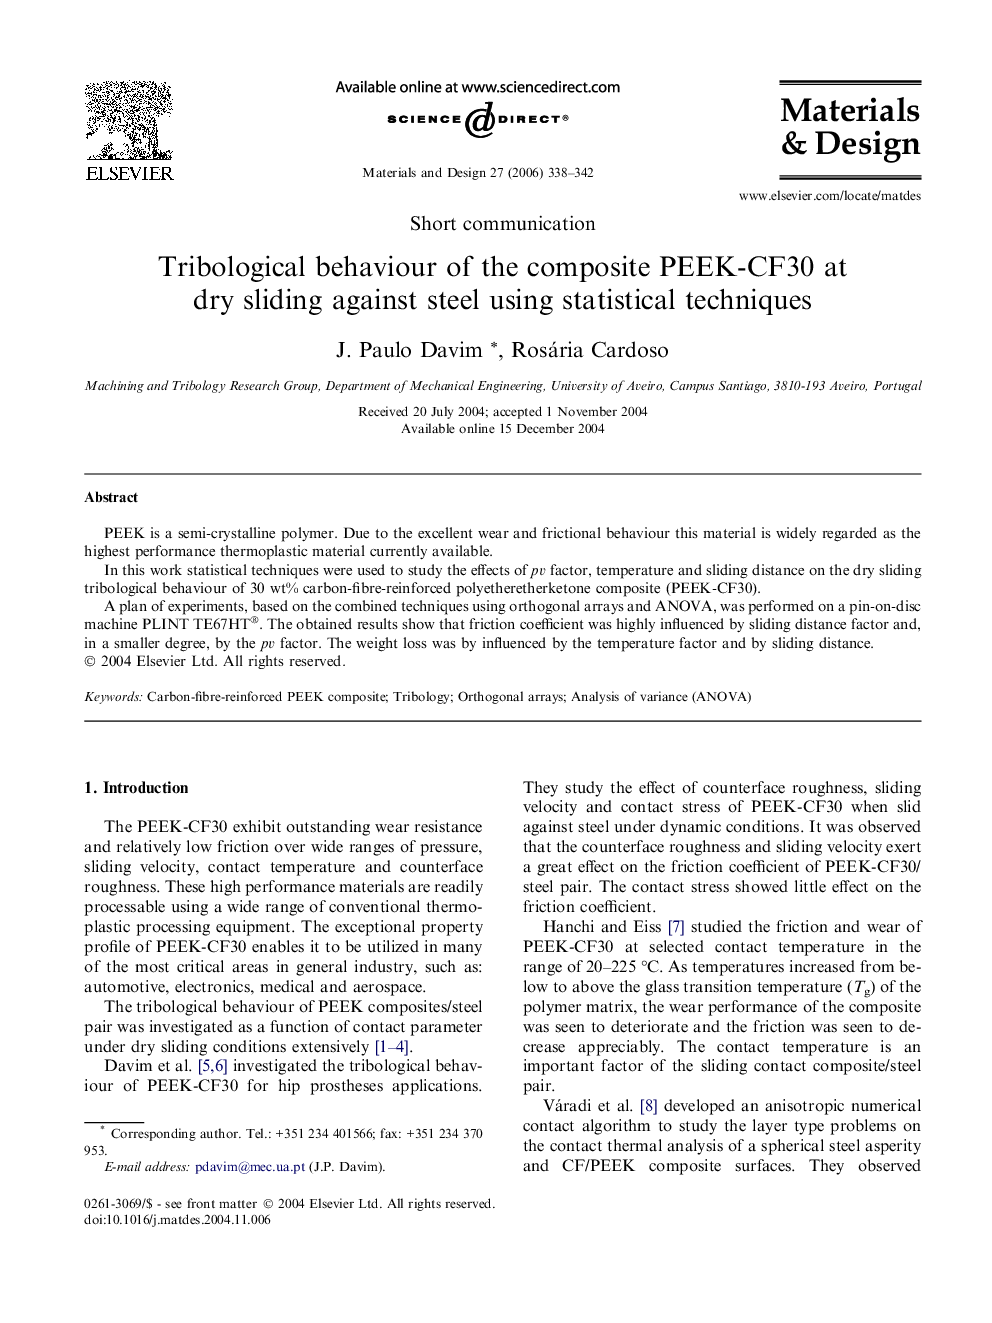 Tribological behaviour of the composite PEEK-CF30 at dry sliding against steel using statistical techniques